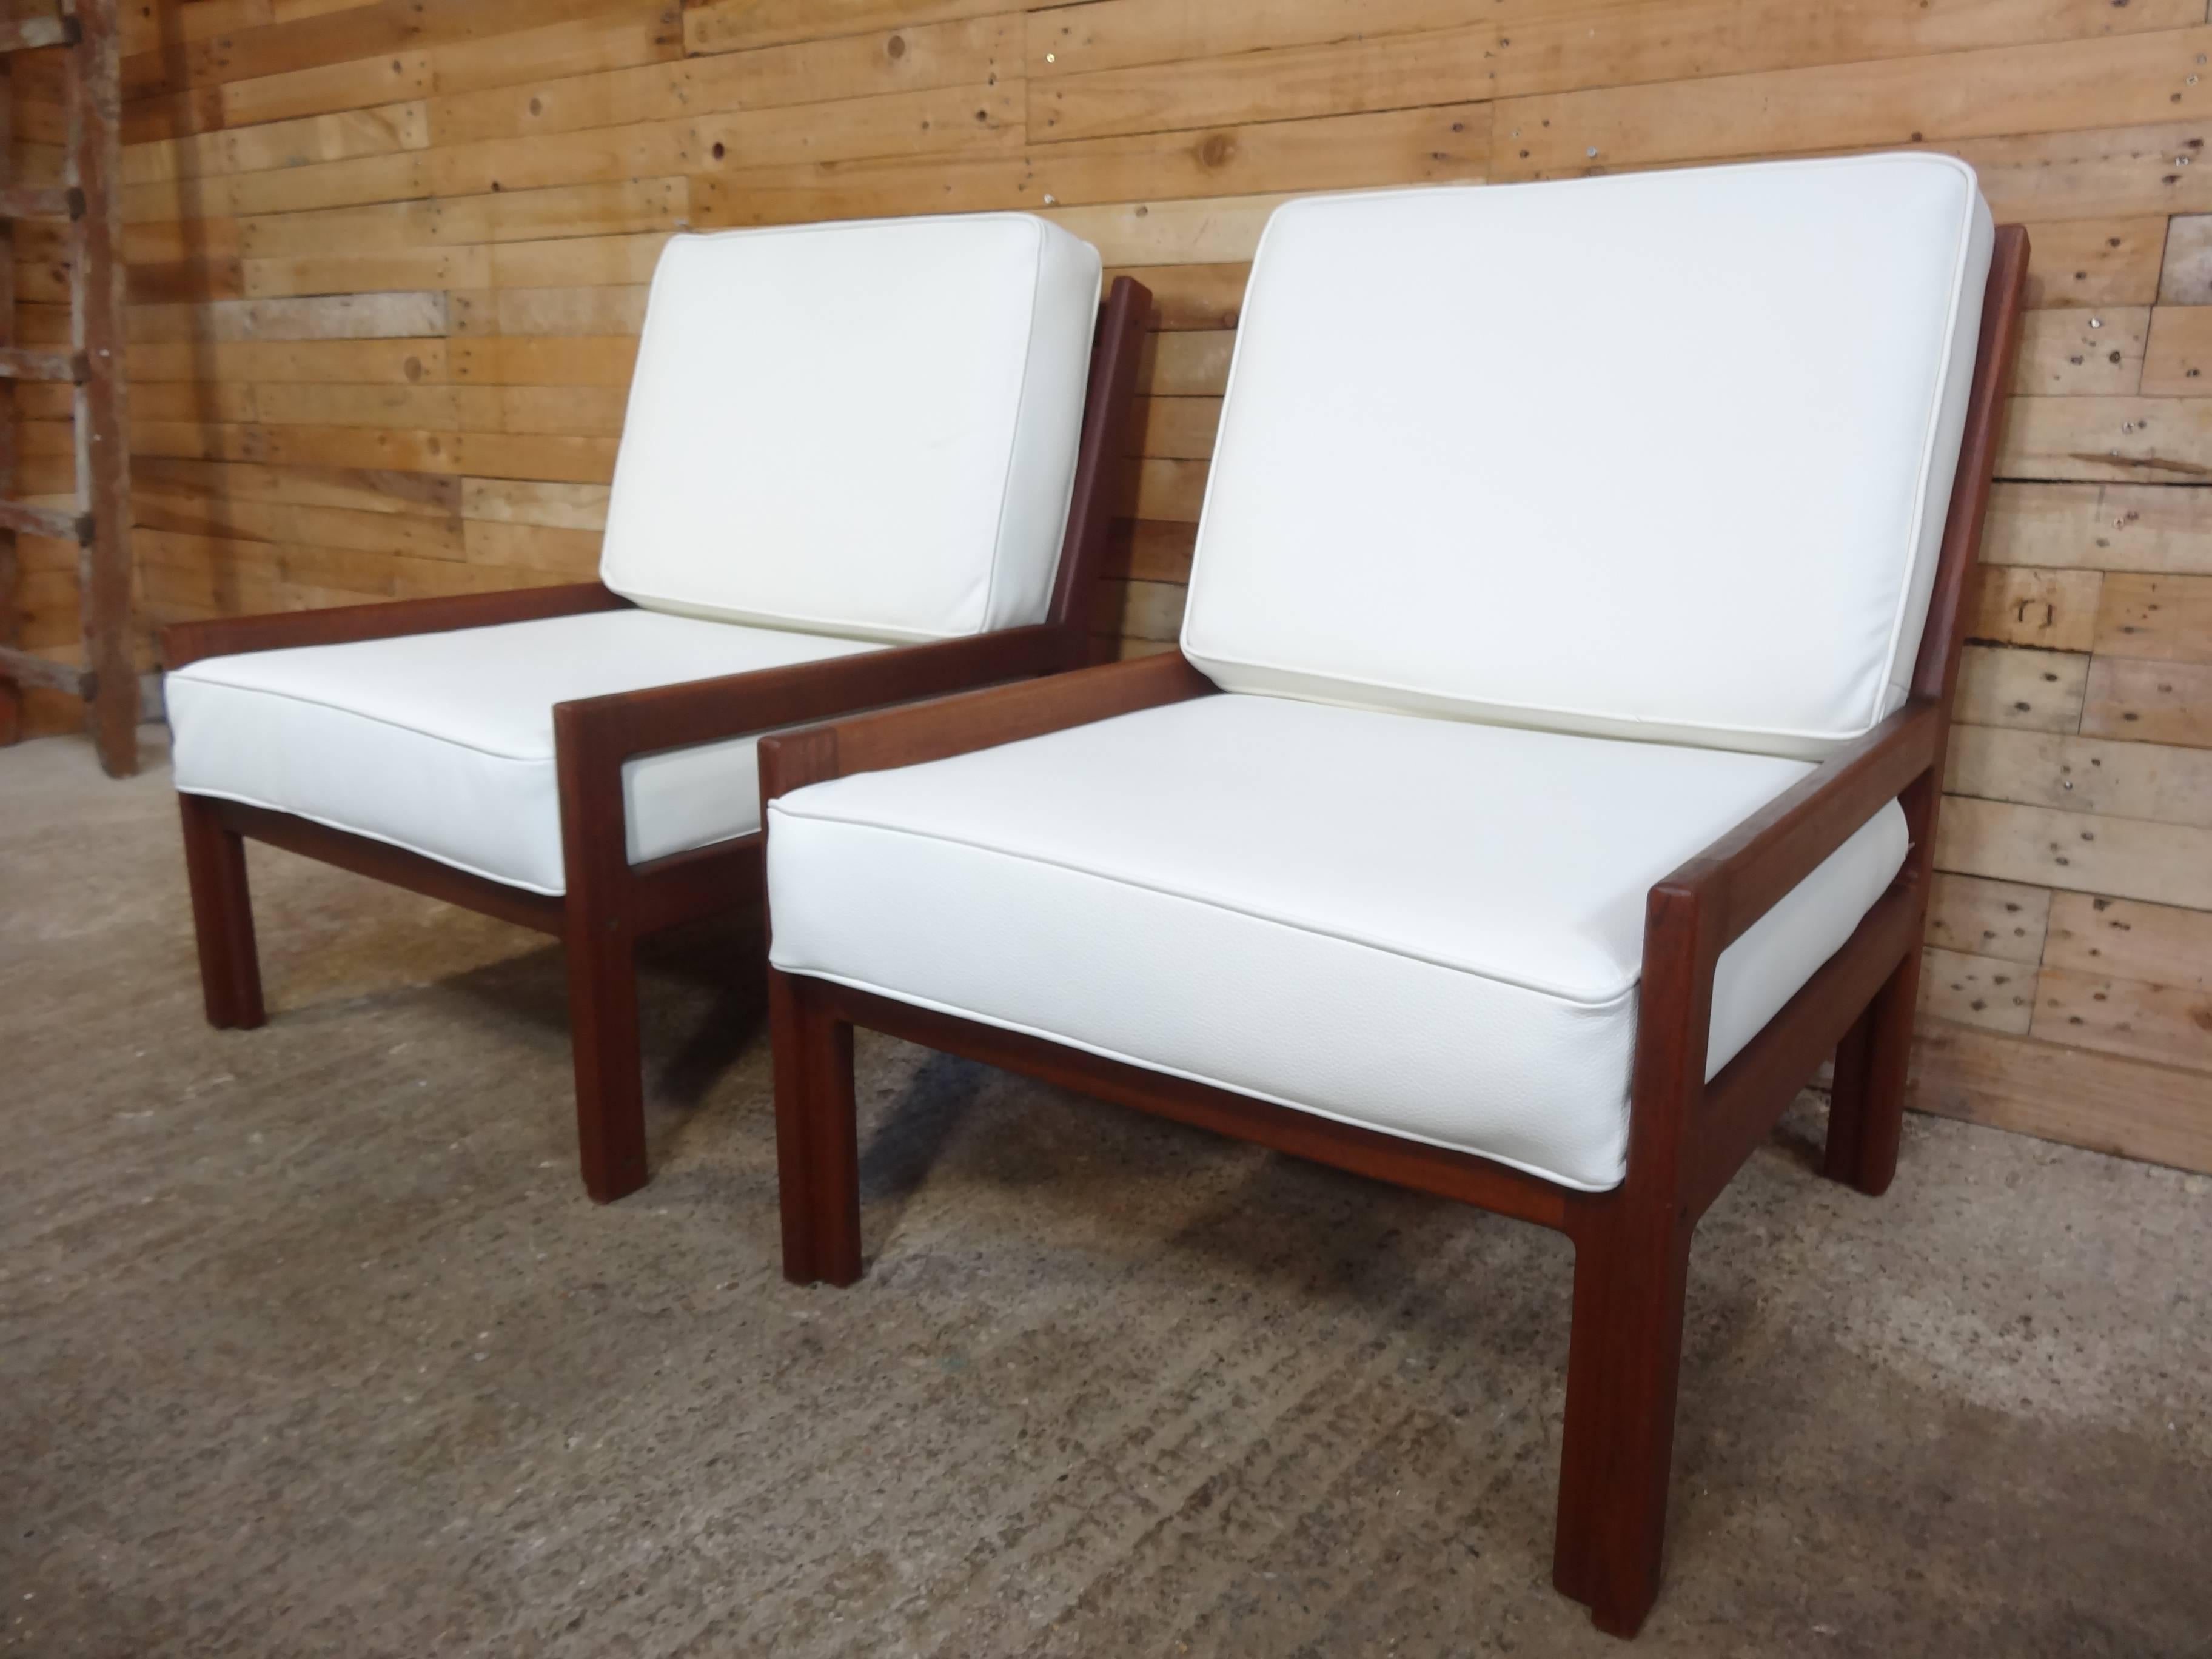 Lovely chairs newly upholstered in white Italian leather, clean minimal 1960s lines make for that Classic retro look. Lovely set of two of these minimalistic lounge chairs frame and leather are in very good vintage condition!
price and shipping is